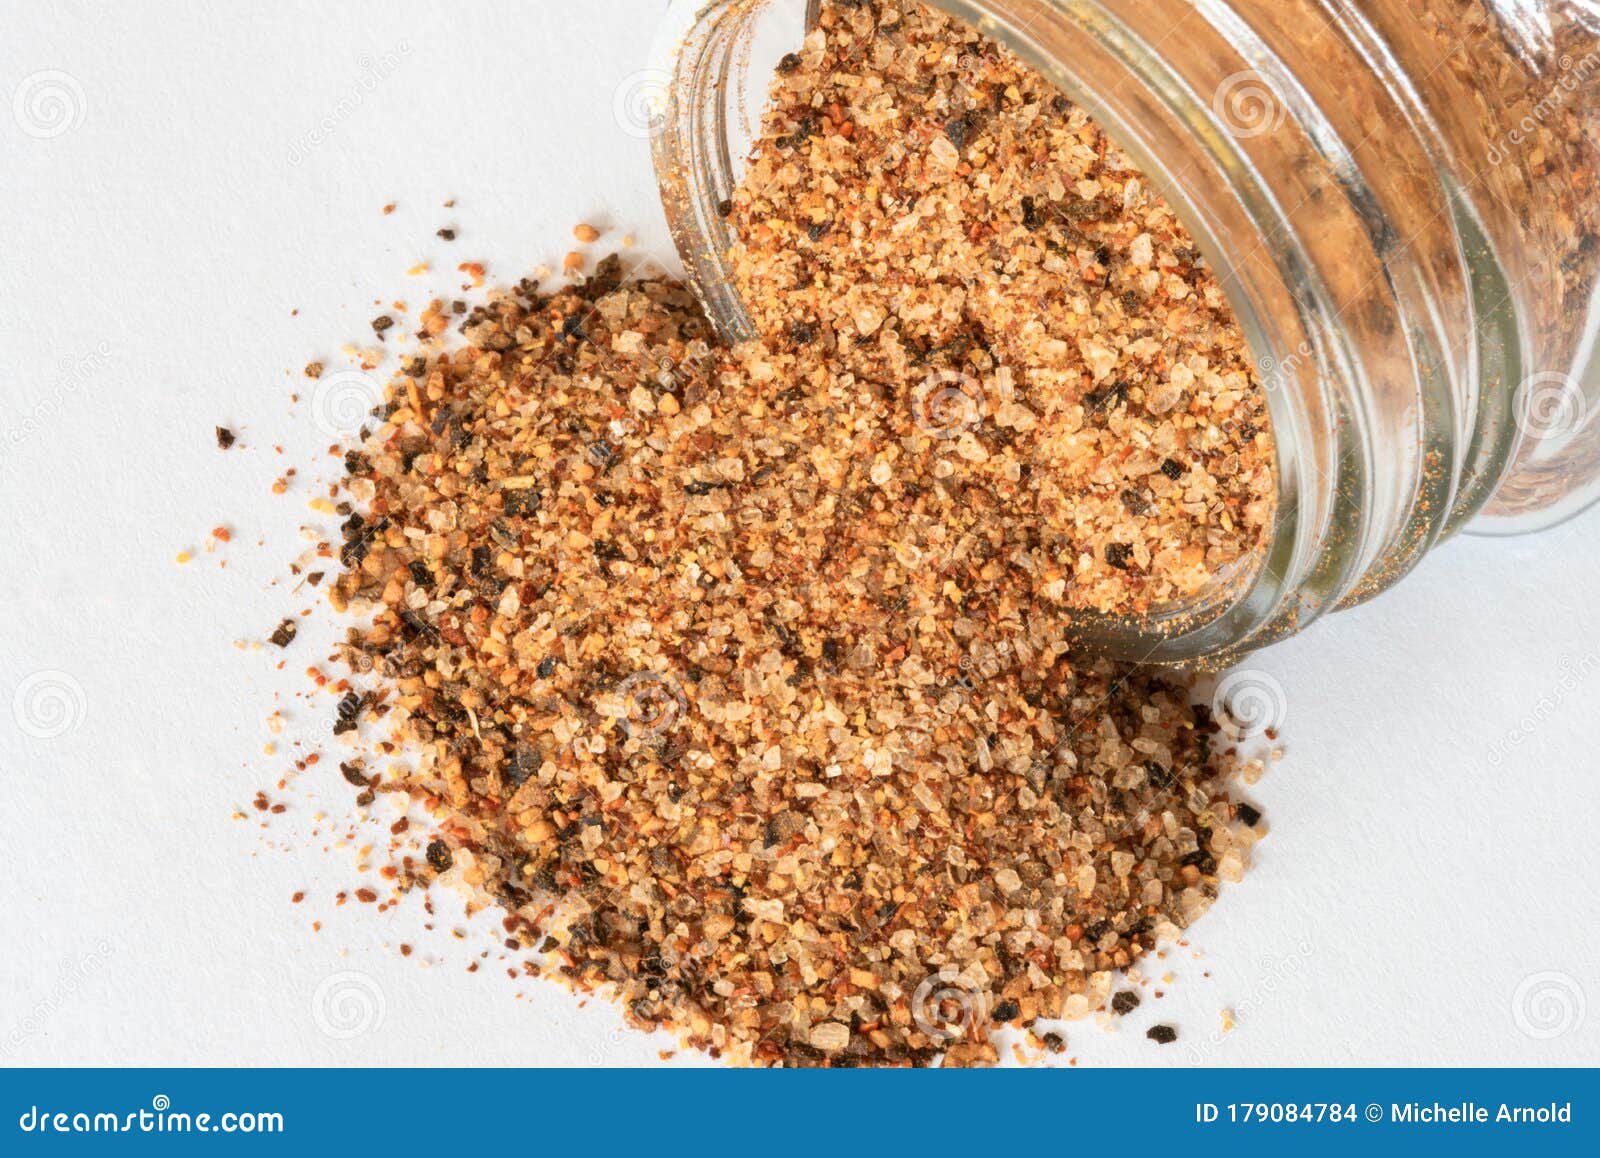 cajun seasoning spilled from a spice jar